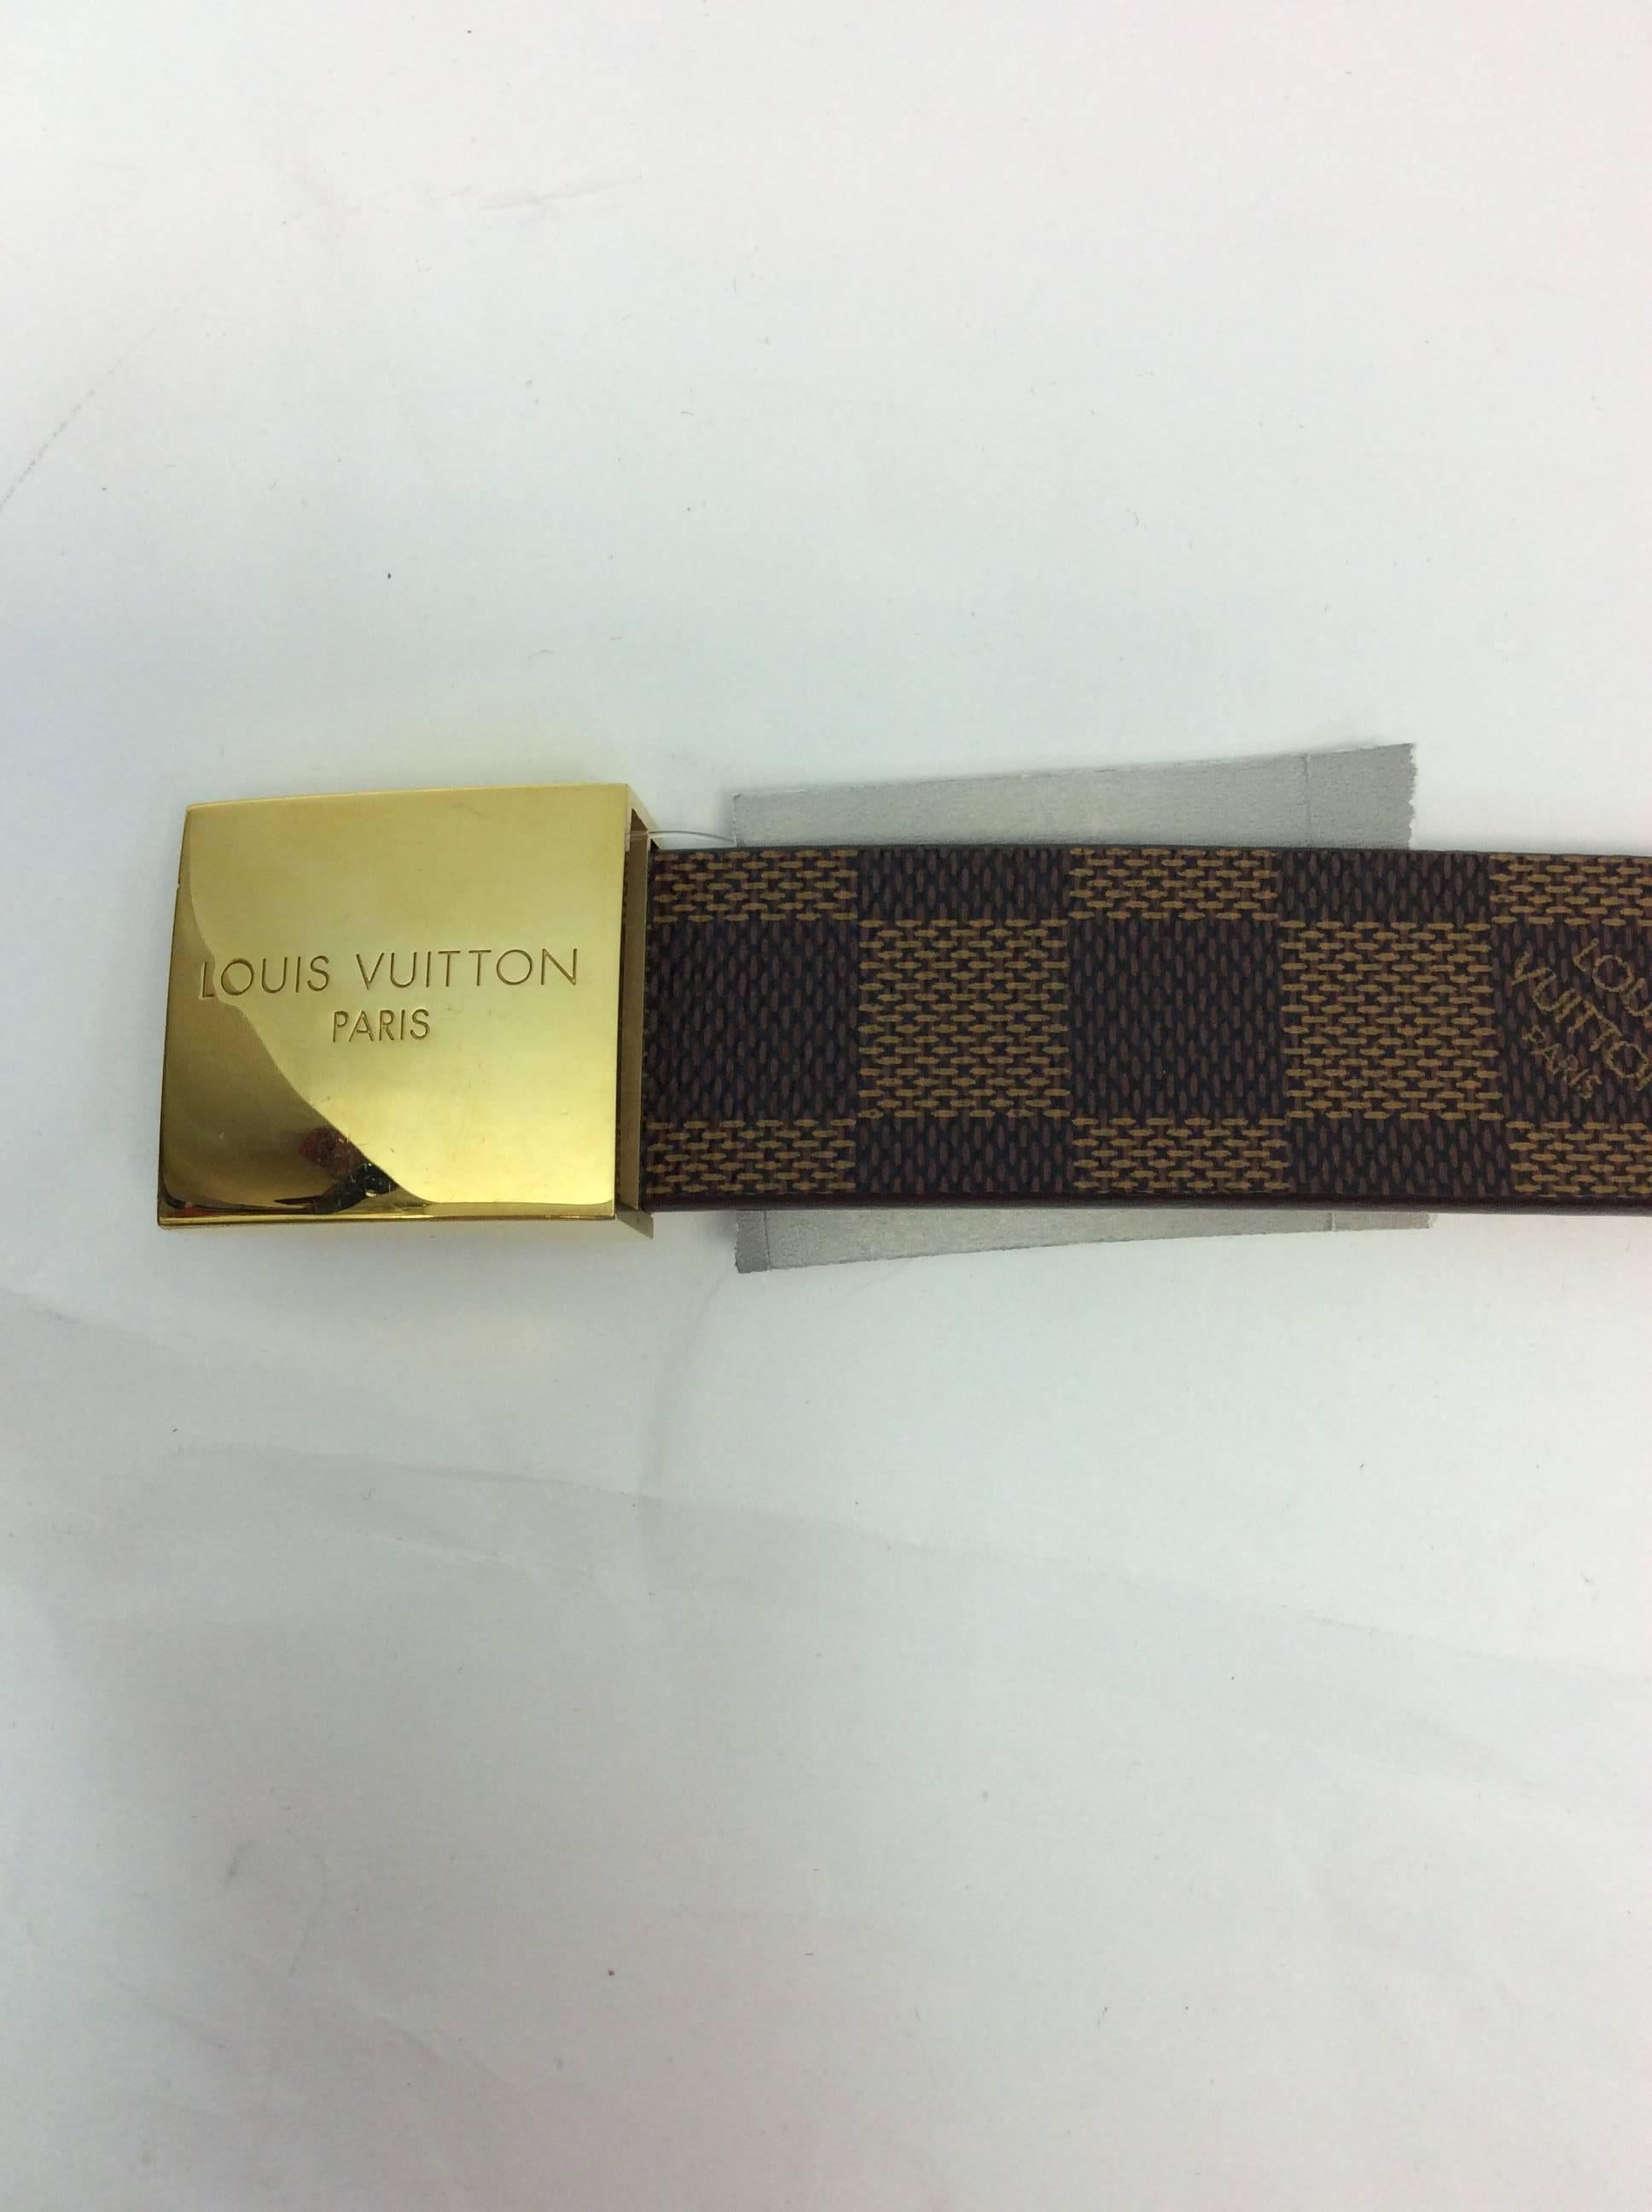 Brown Damier Belt with Gold Hardware
38 - 41 adjustable length
5 size settings
Leather and metal